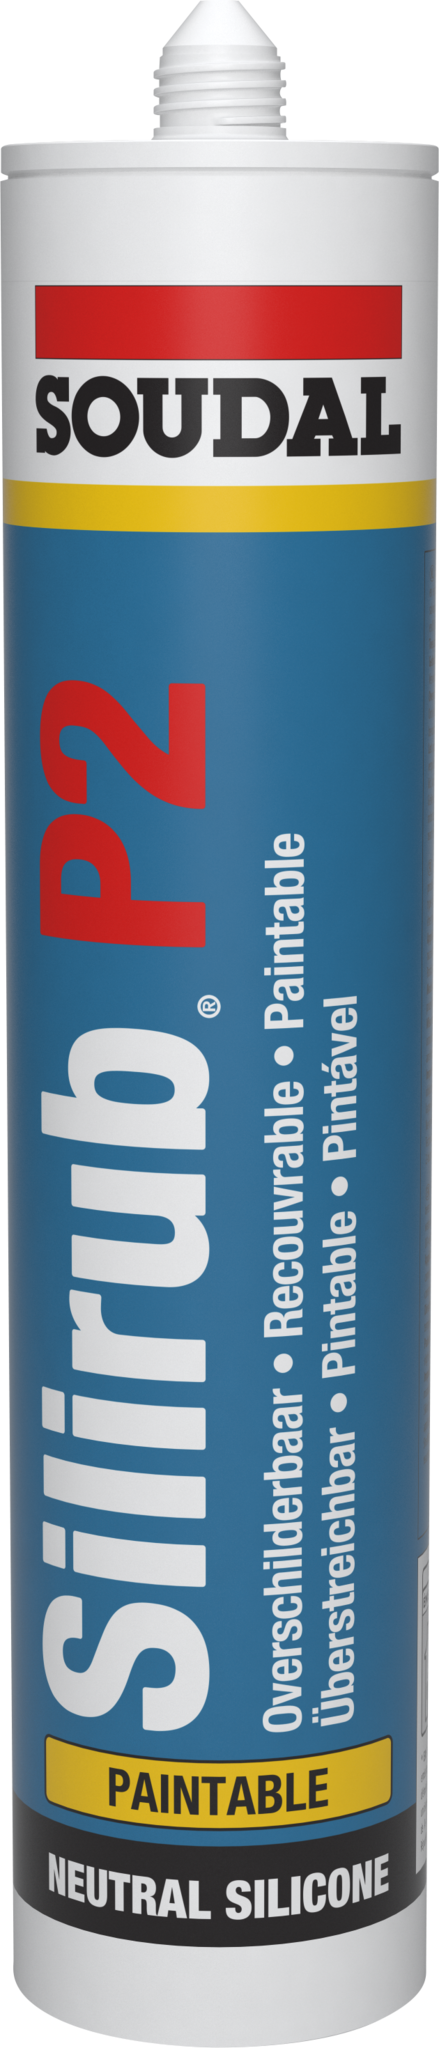 SOUDAL 300 ml Silirub P2 limited paintable silicone in a tube